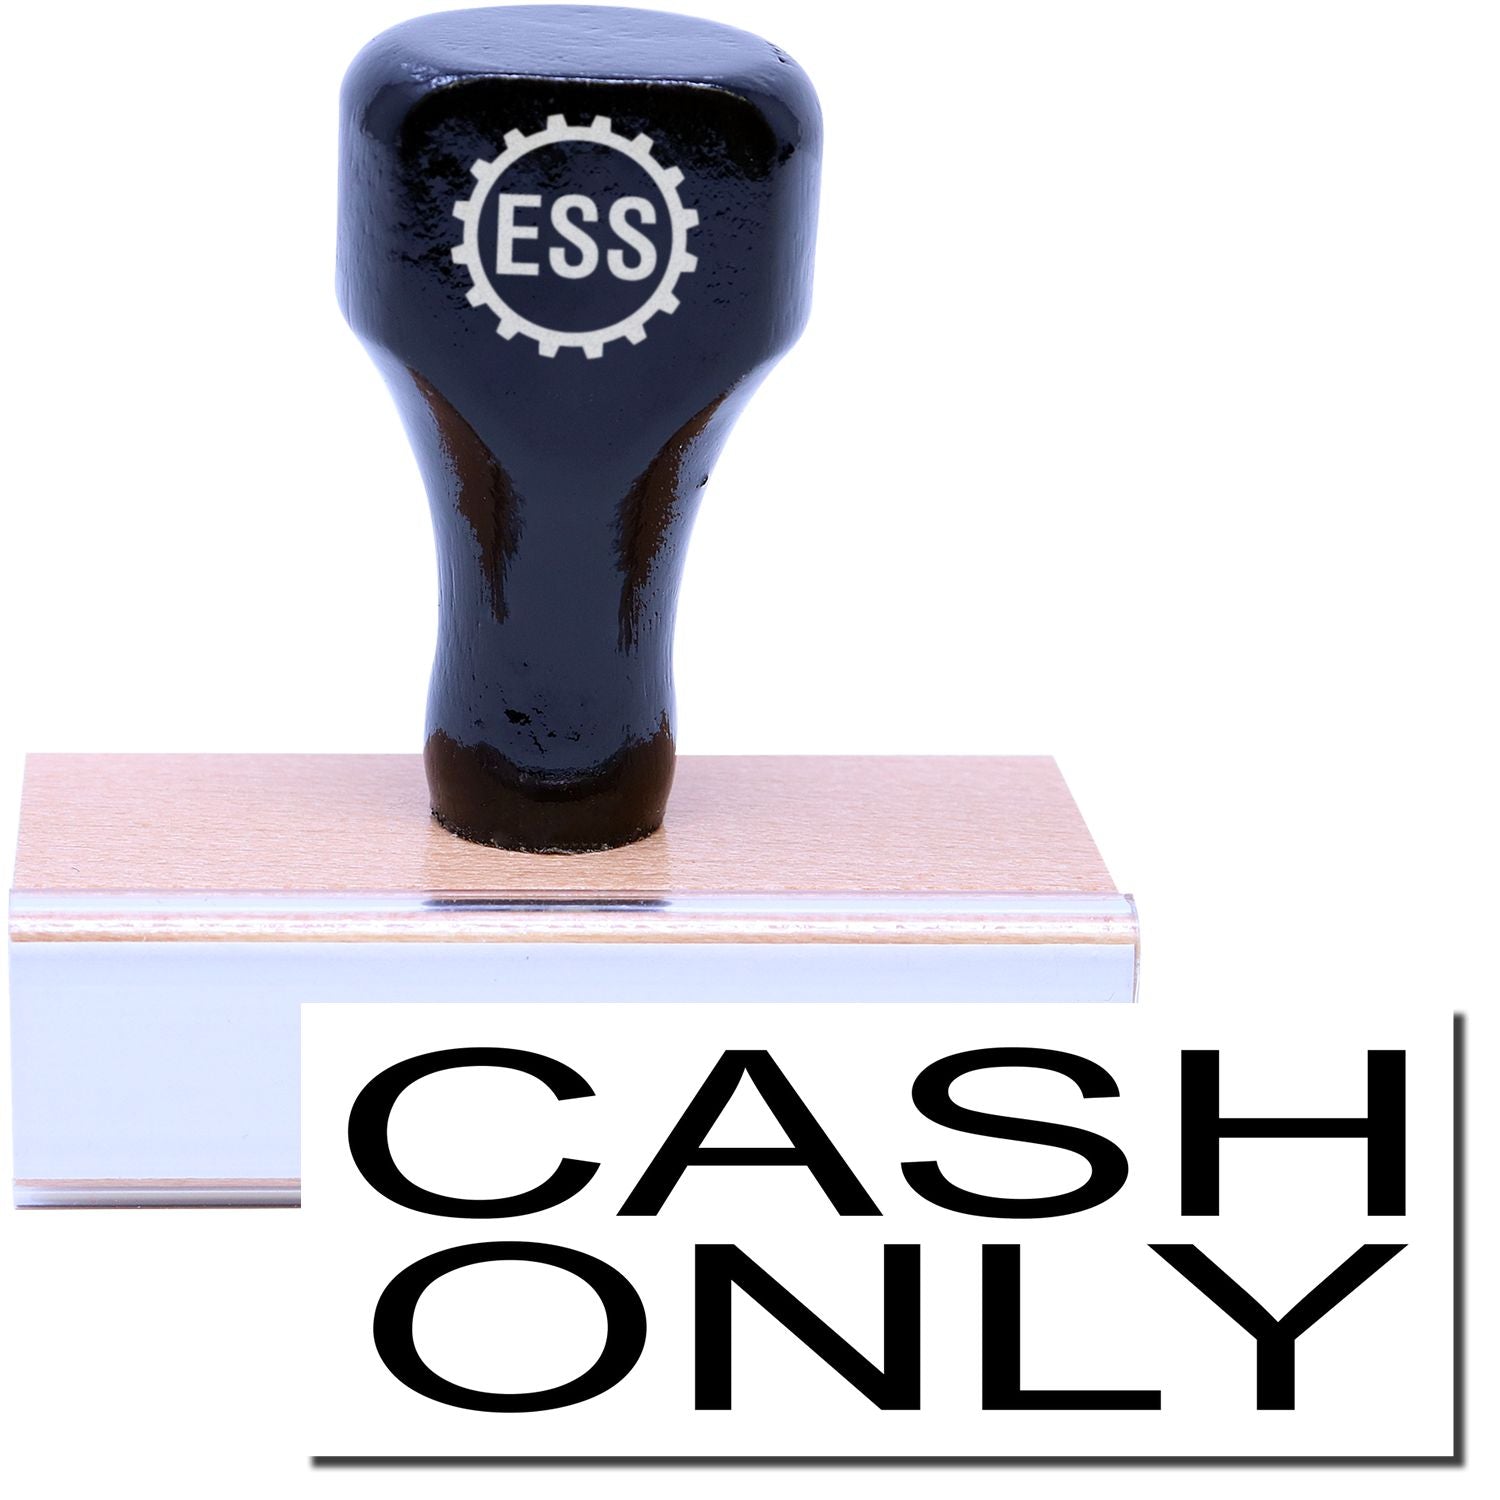 A stock office rubber stamp with a stamped image showing how the text "CASH ONLY" is displayed after stamping.